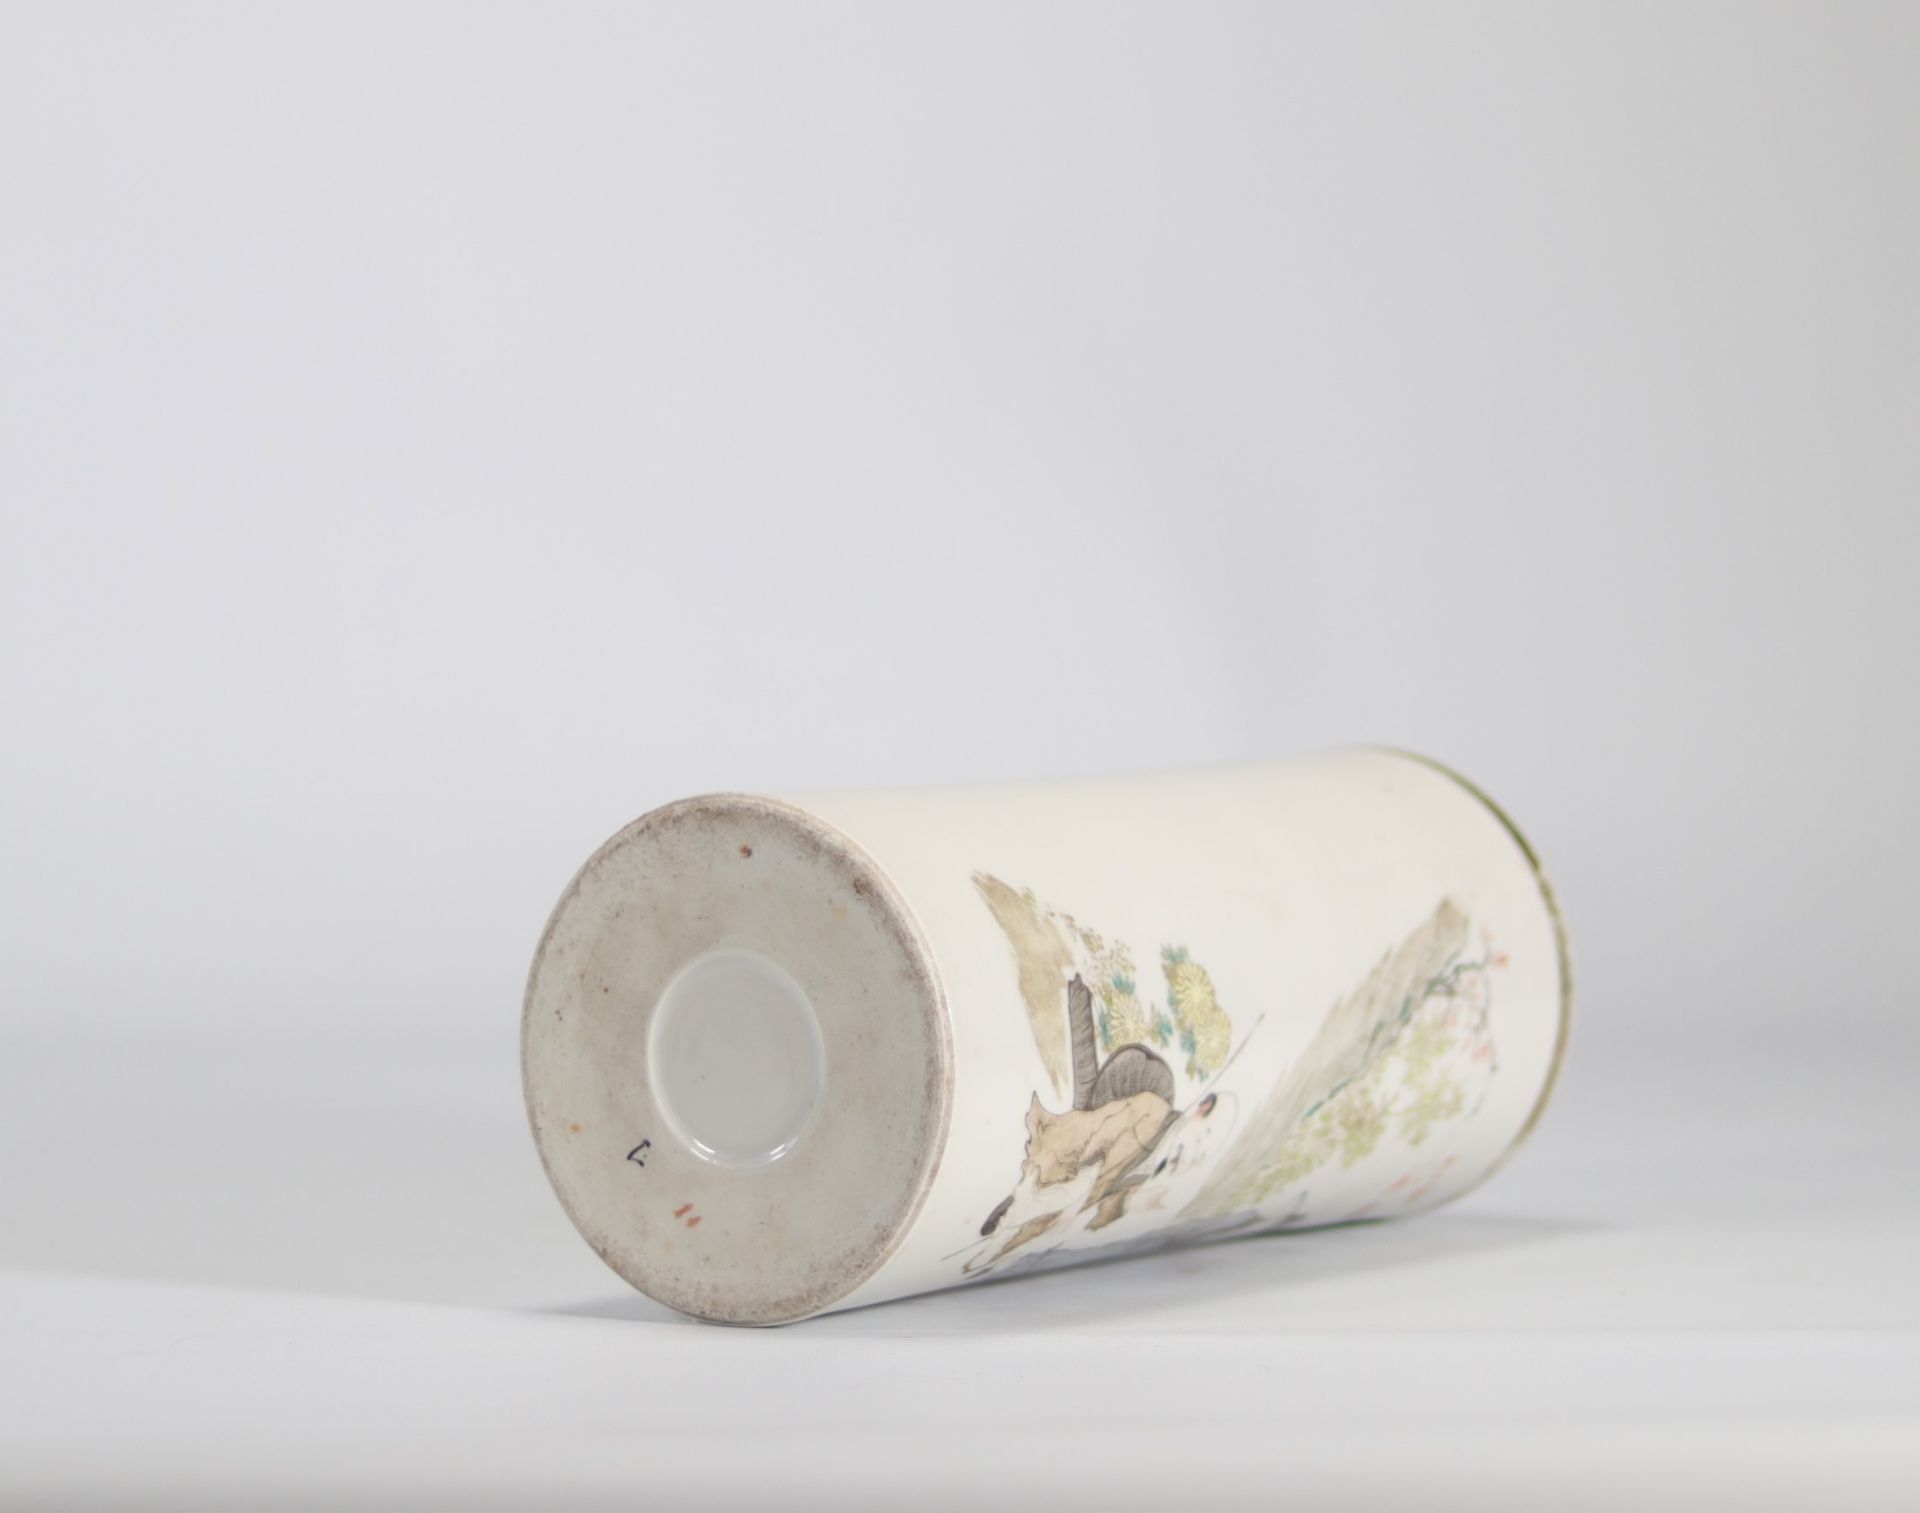 Qianjiang cai porcelain brush holder decorated with characters - Image 5 of 5